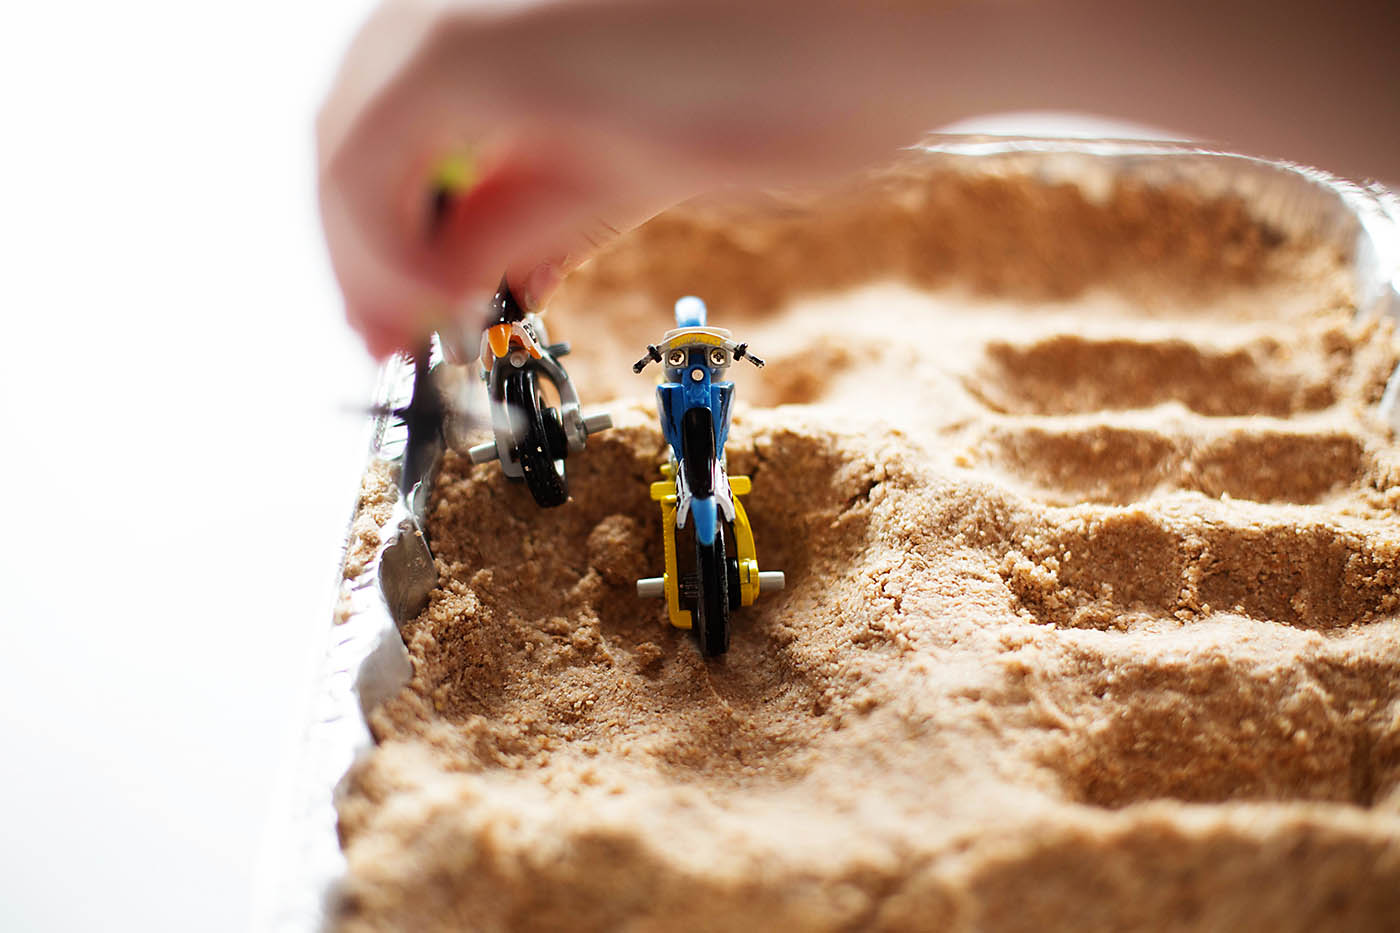 DIY sand for a toy motocross track - fun indoor play idea!